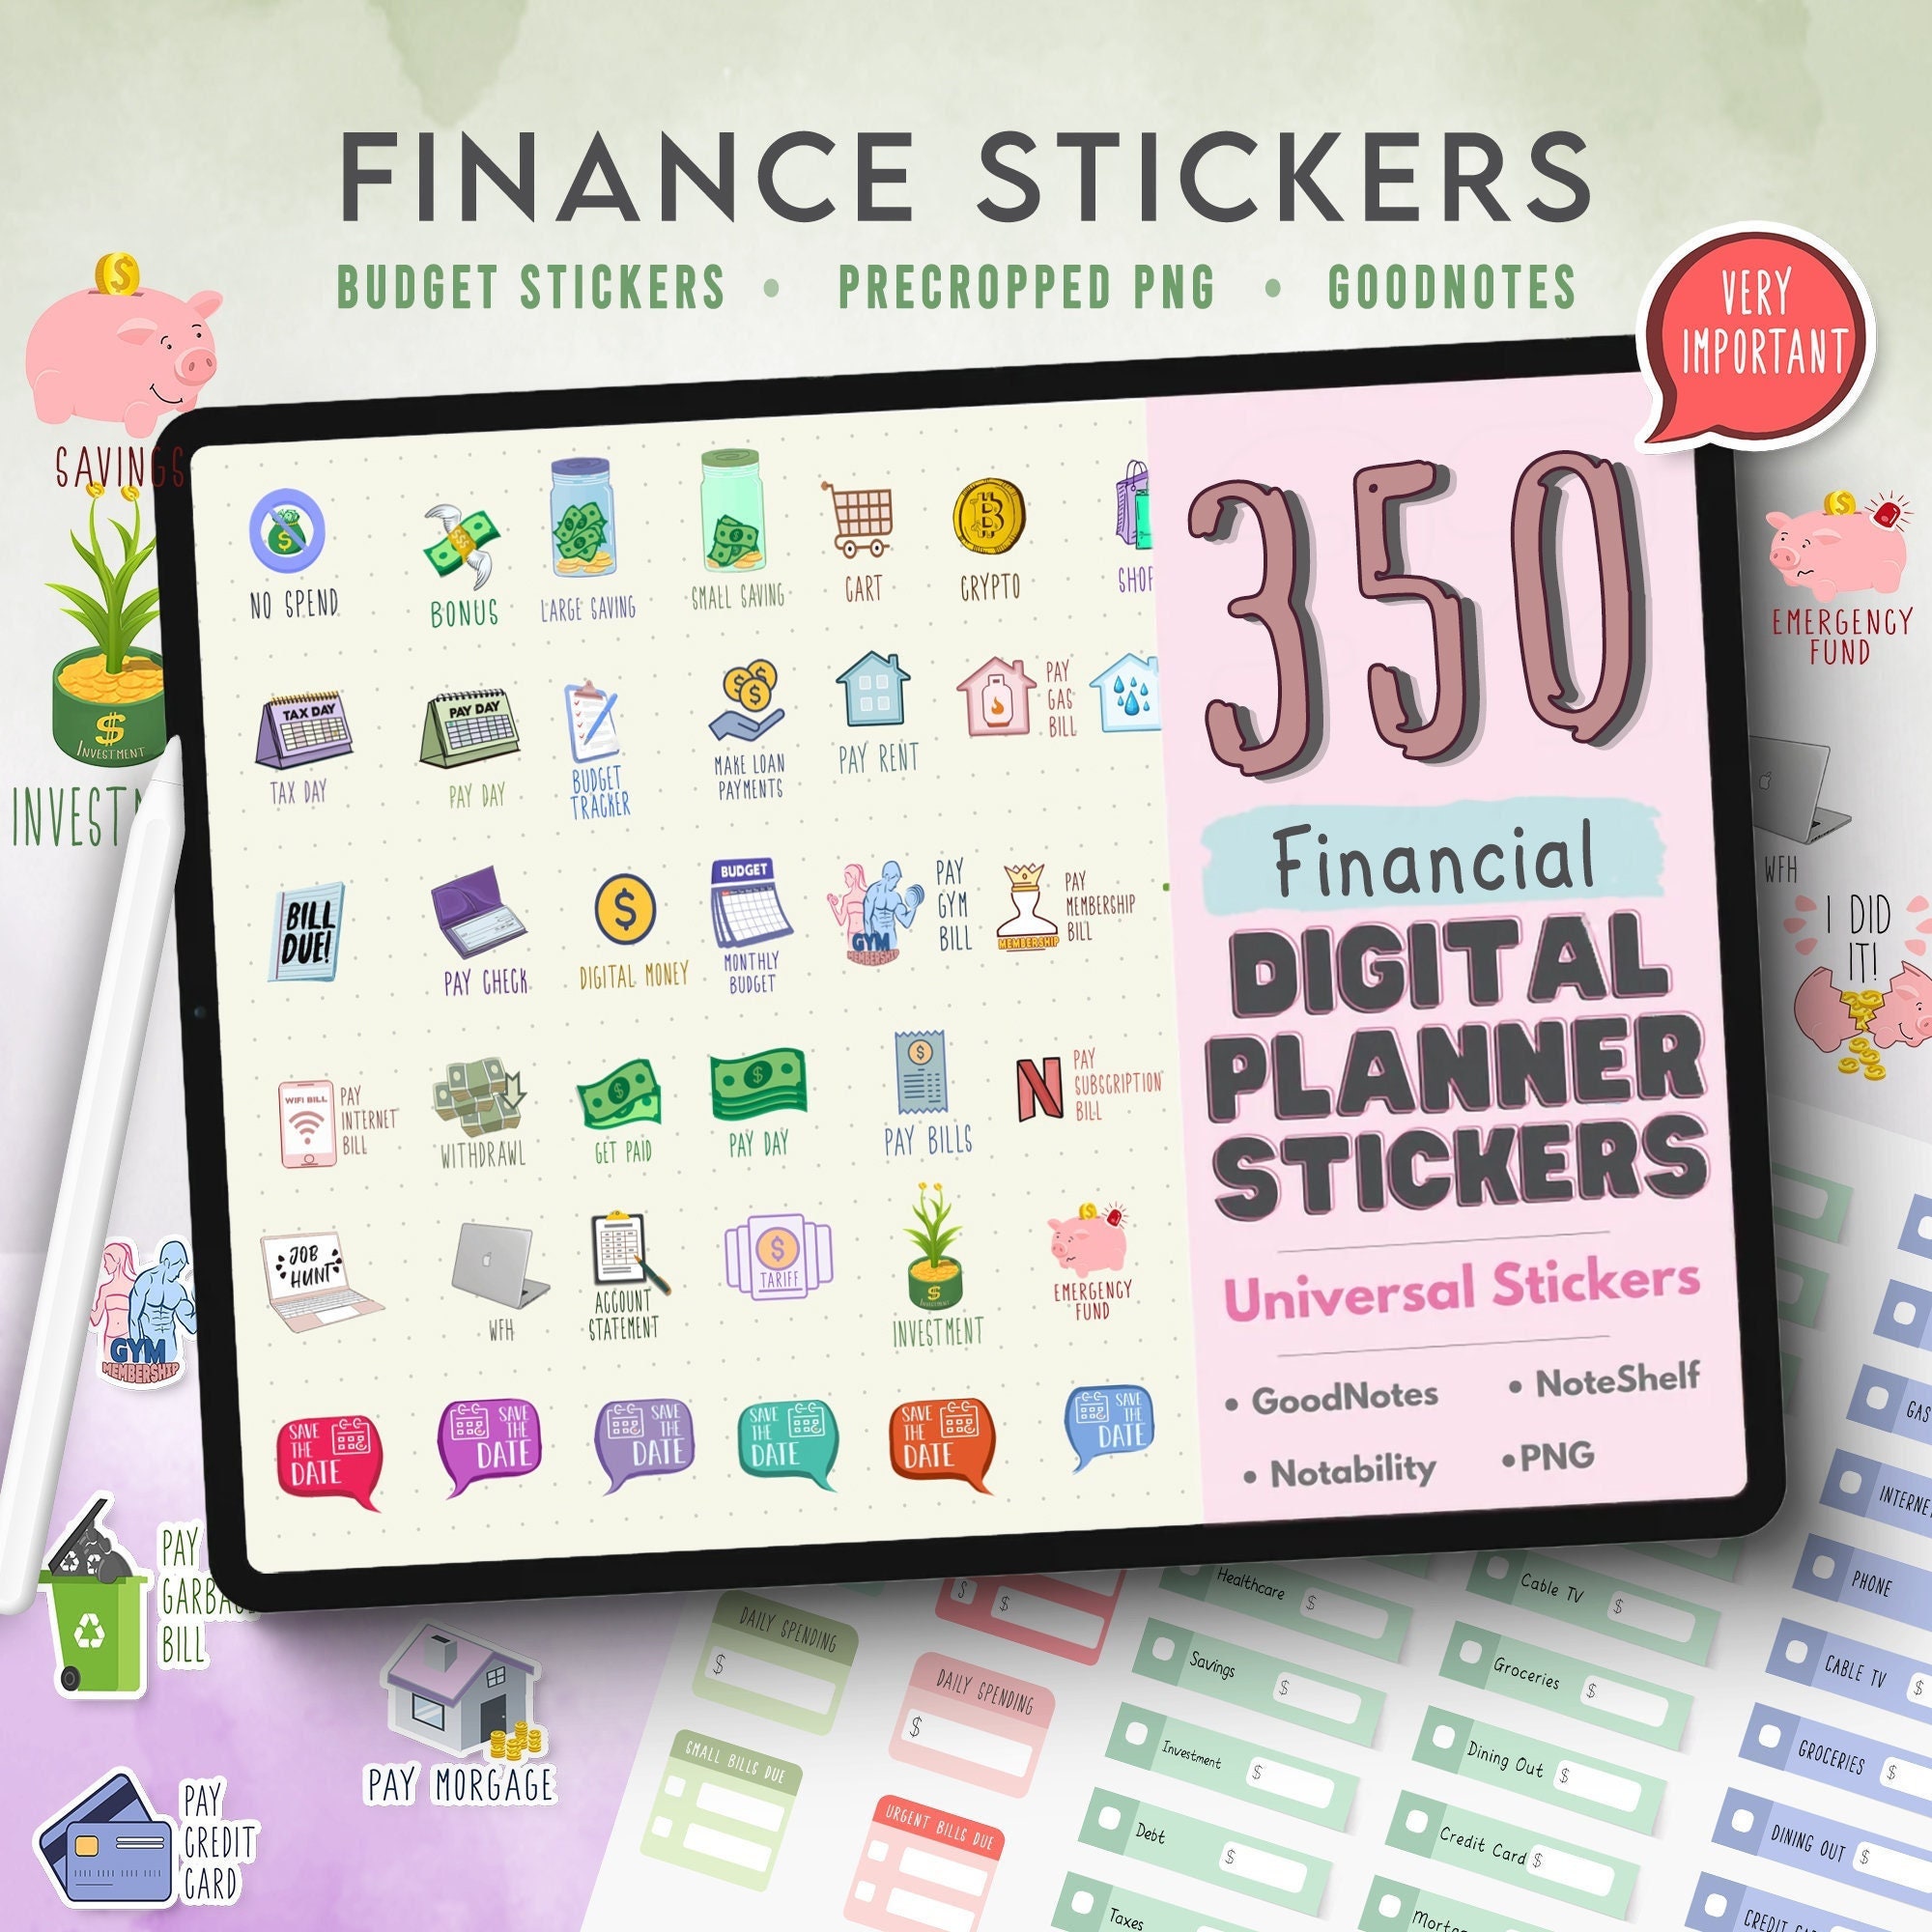 100 Envelope Stickers for Savings Challenge (Total Savings 5,050.00).  Stickers for Planners, Saving Envelopes, and Bullet Journals || F758